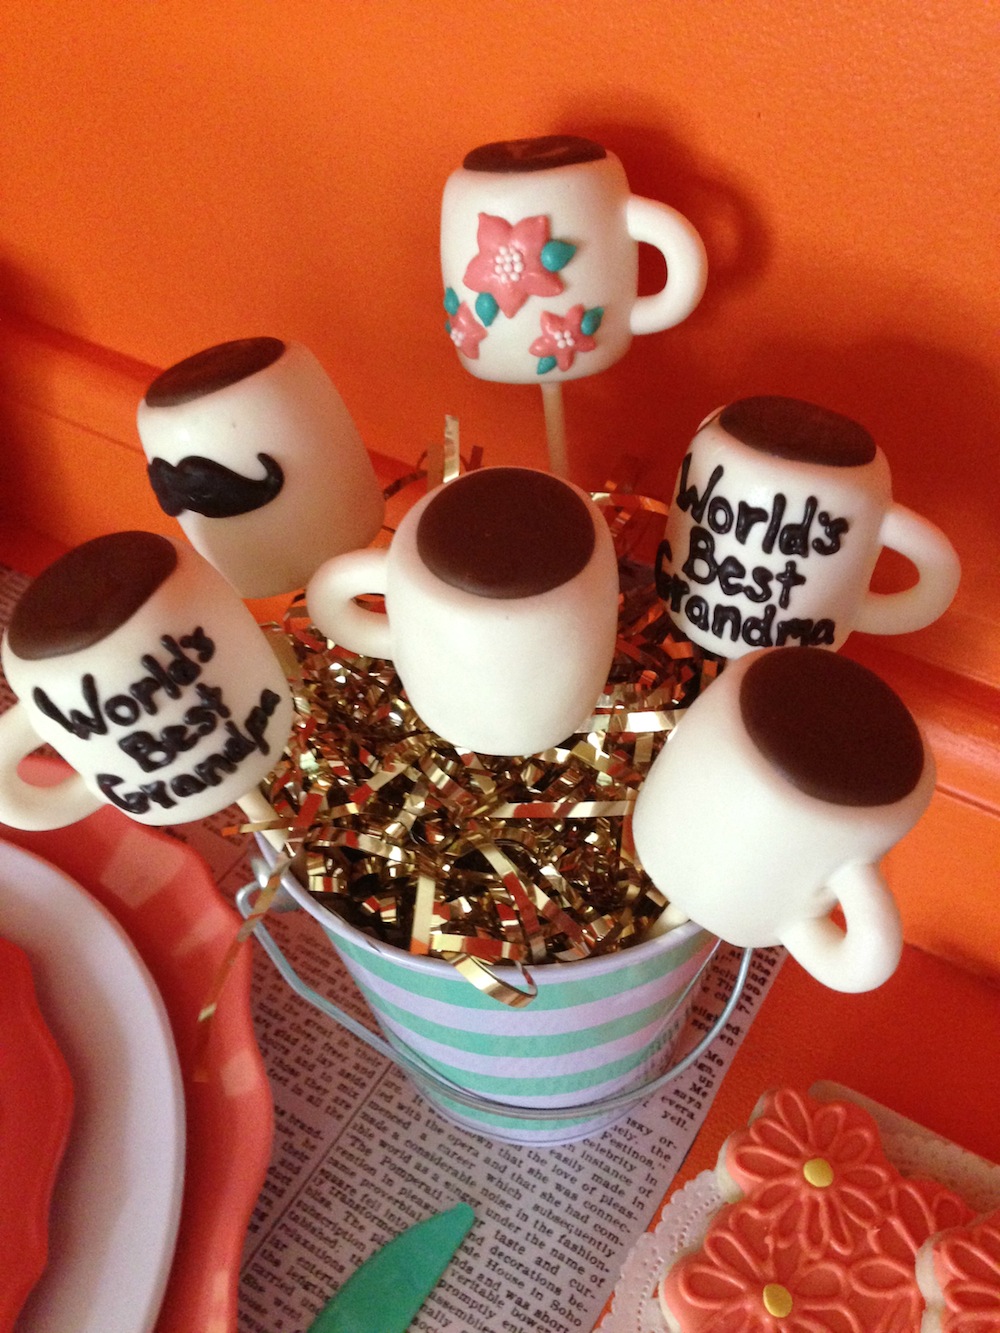 grandparents-day-styled-photo-shoot-coffee-cake-pops.jpg